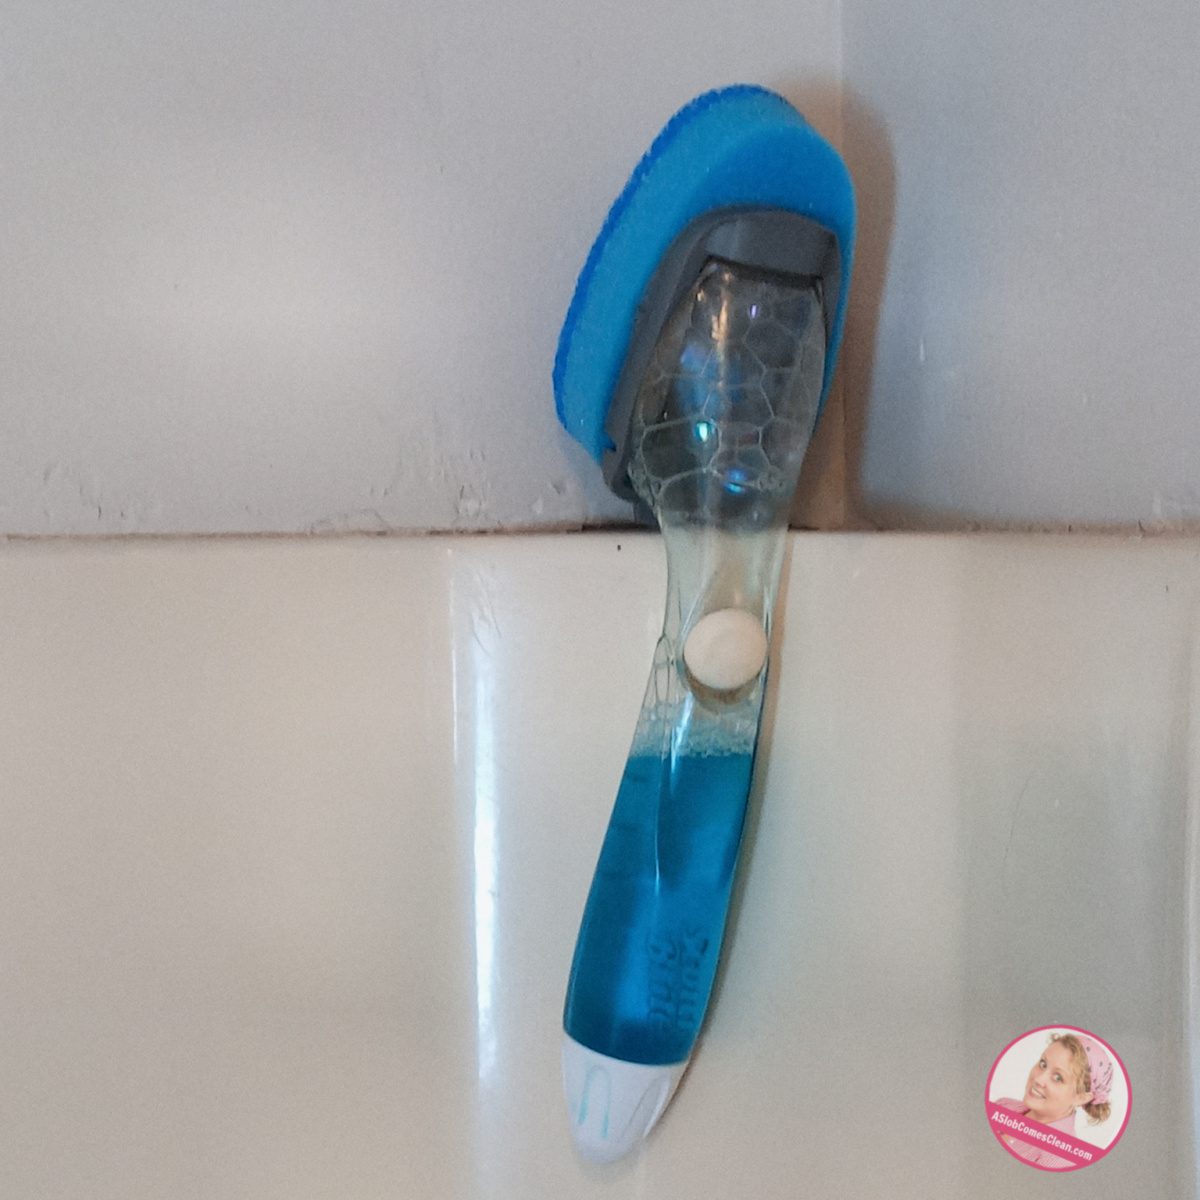 https://www.aslobcomesclean.com/wp-content/uploads/2014/10/easy-shower-cleaning-tool-dishsoap-wand-at-aslobcomesclean.com_.jpg